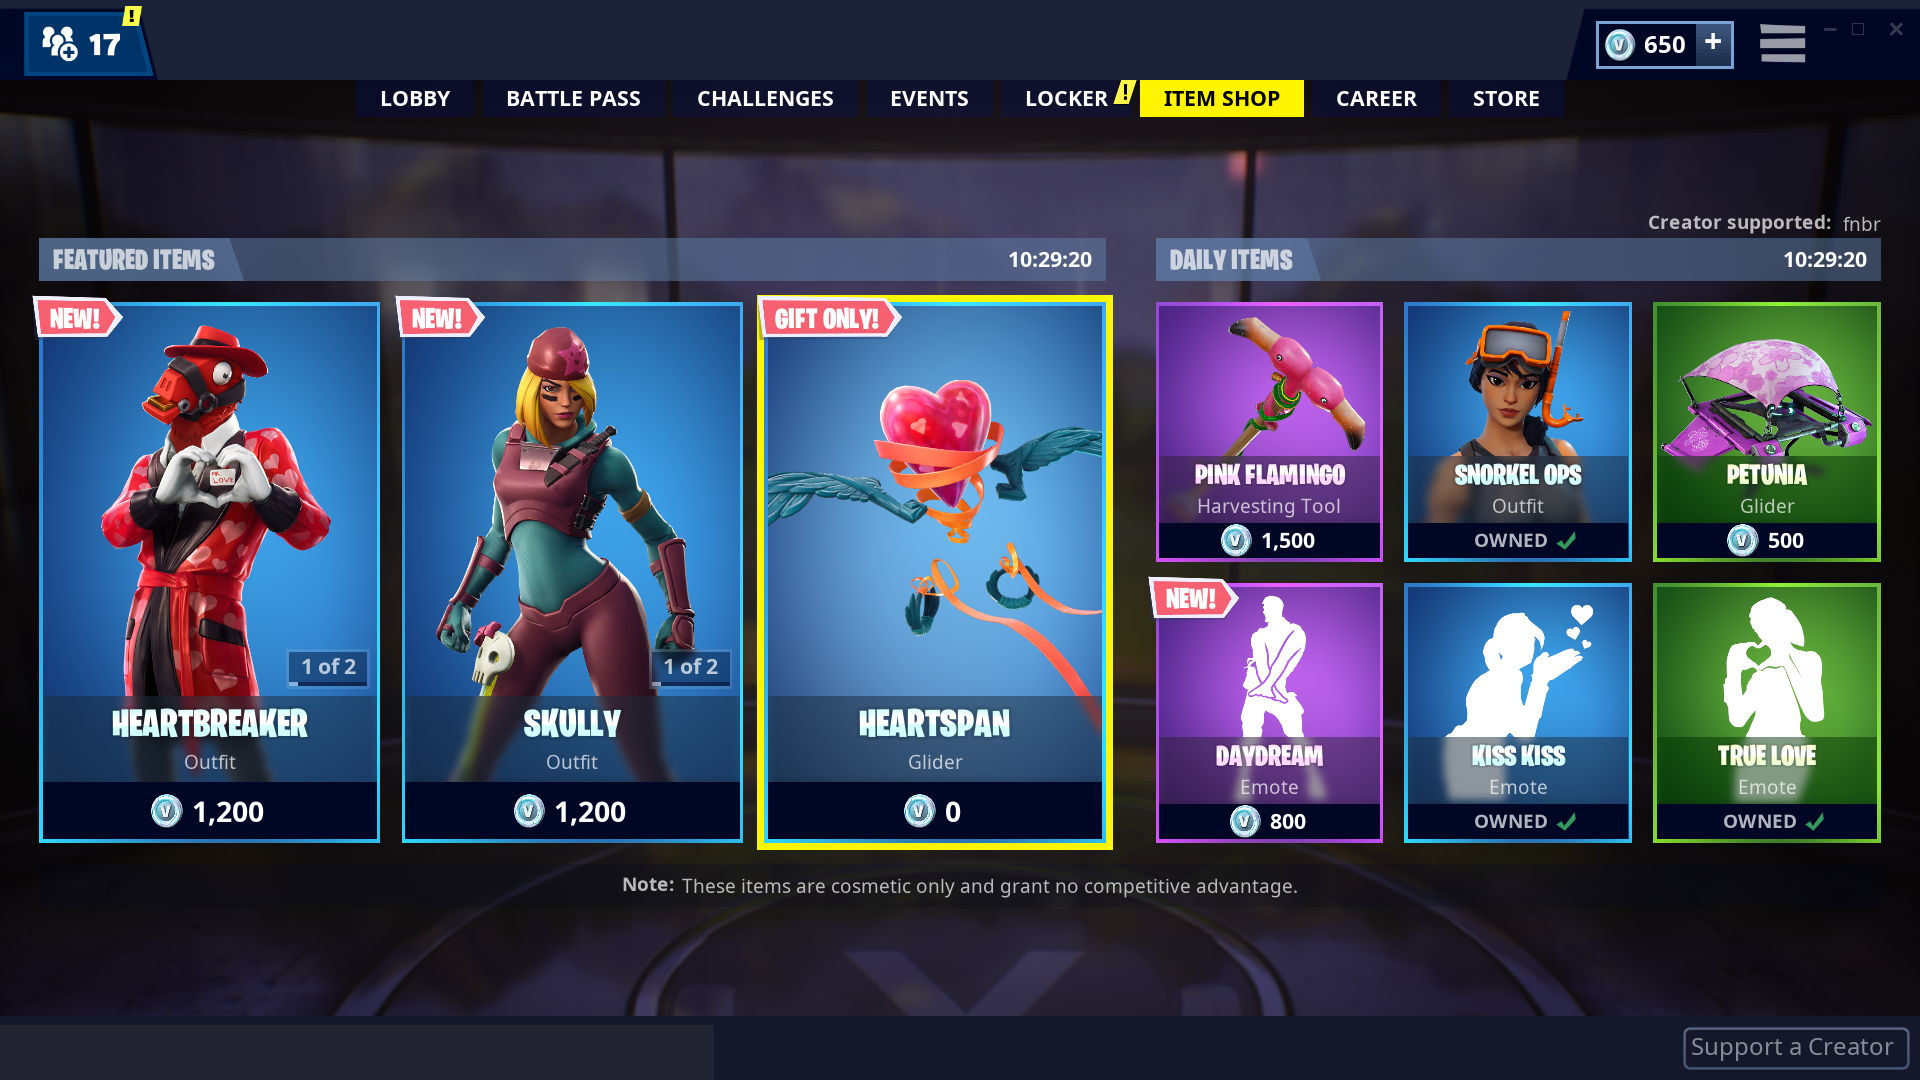 head to the item shop tab and select the heartspan panel - fortnite support a creator codes